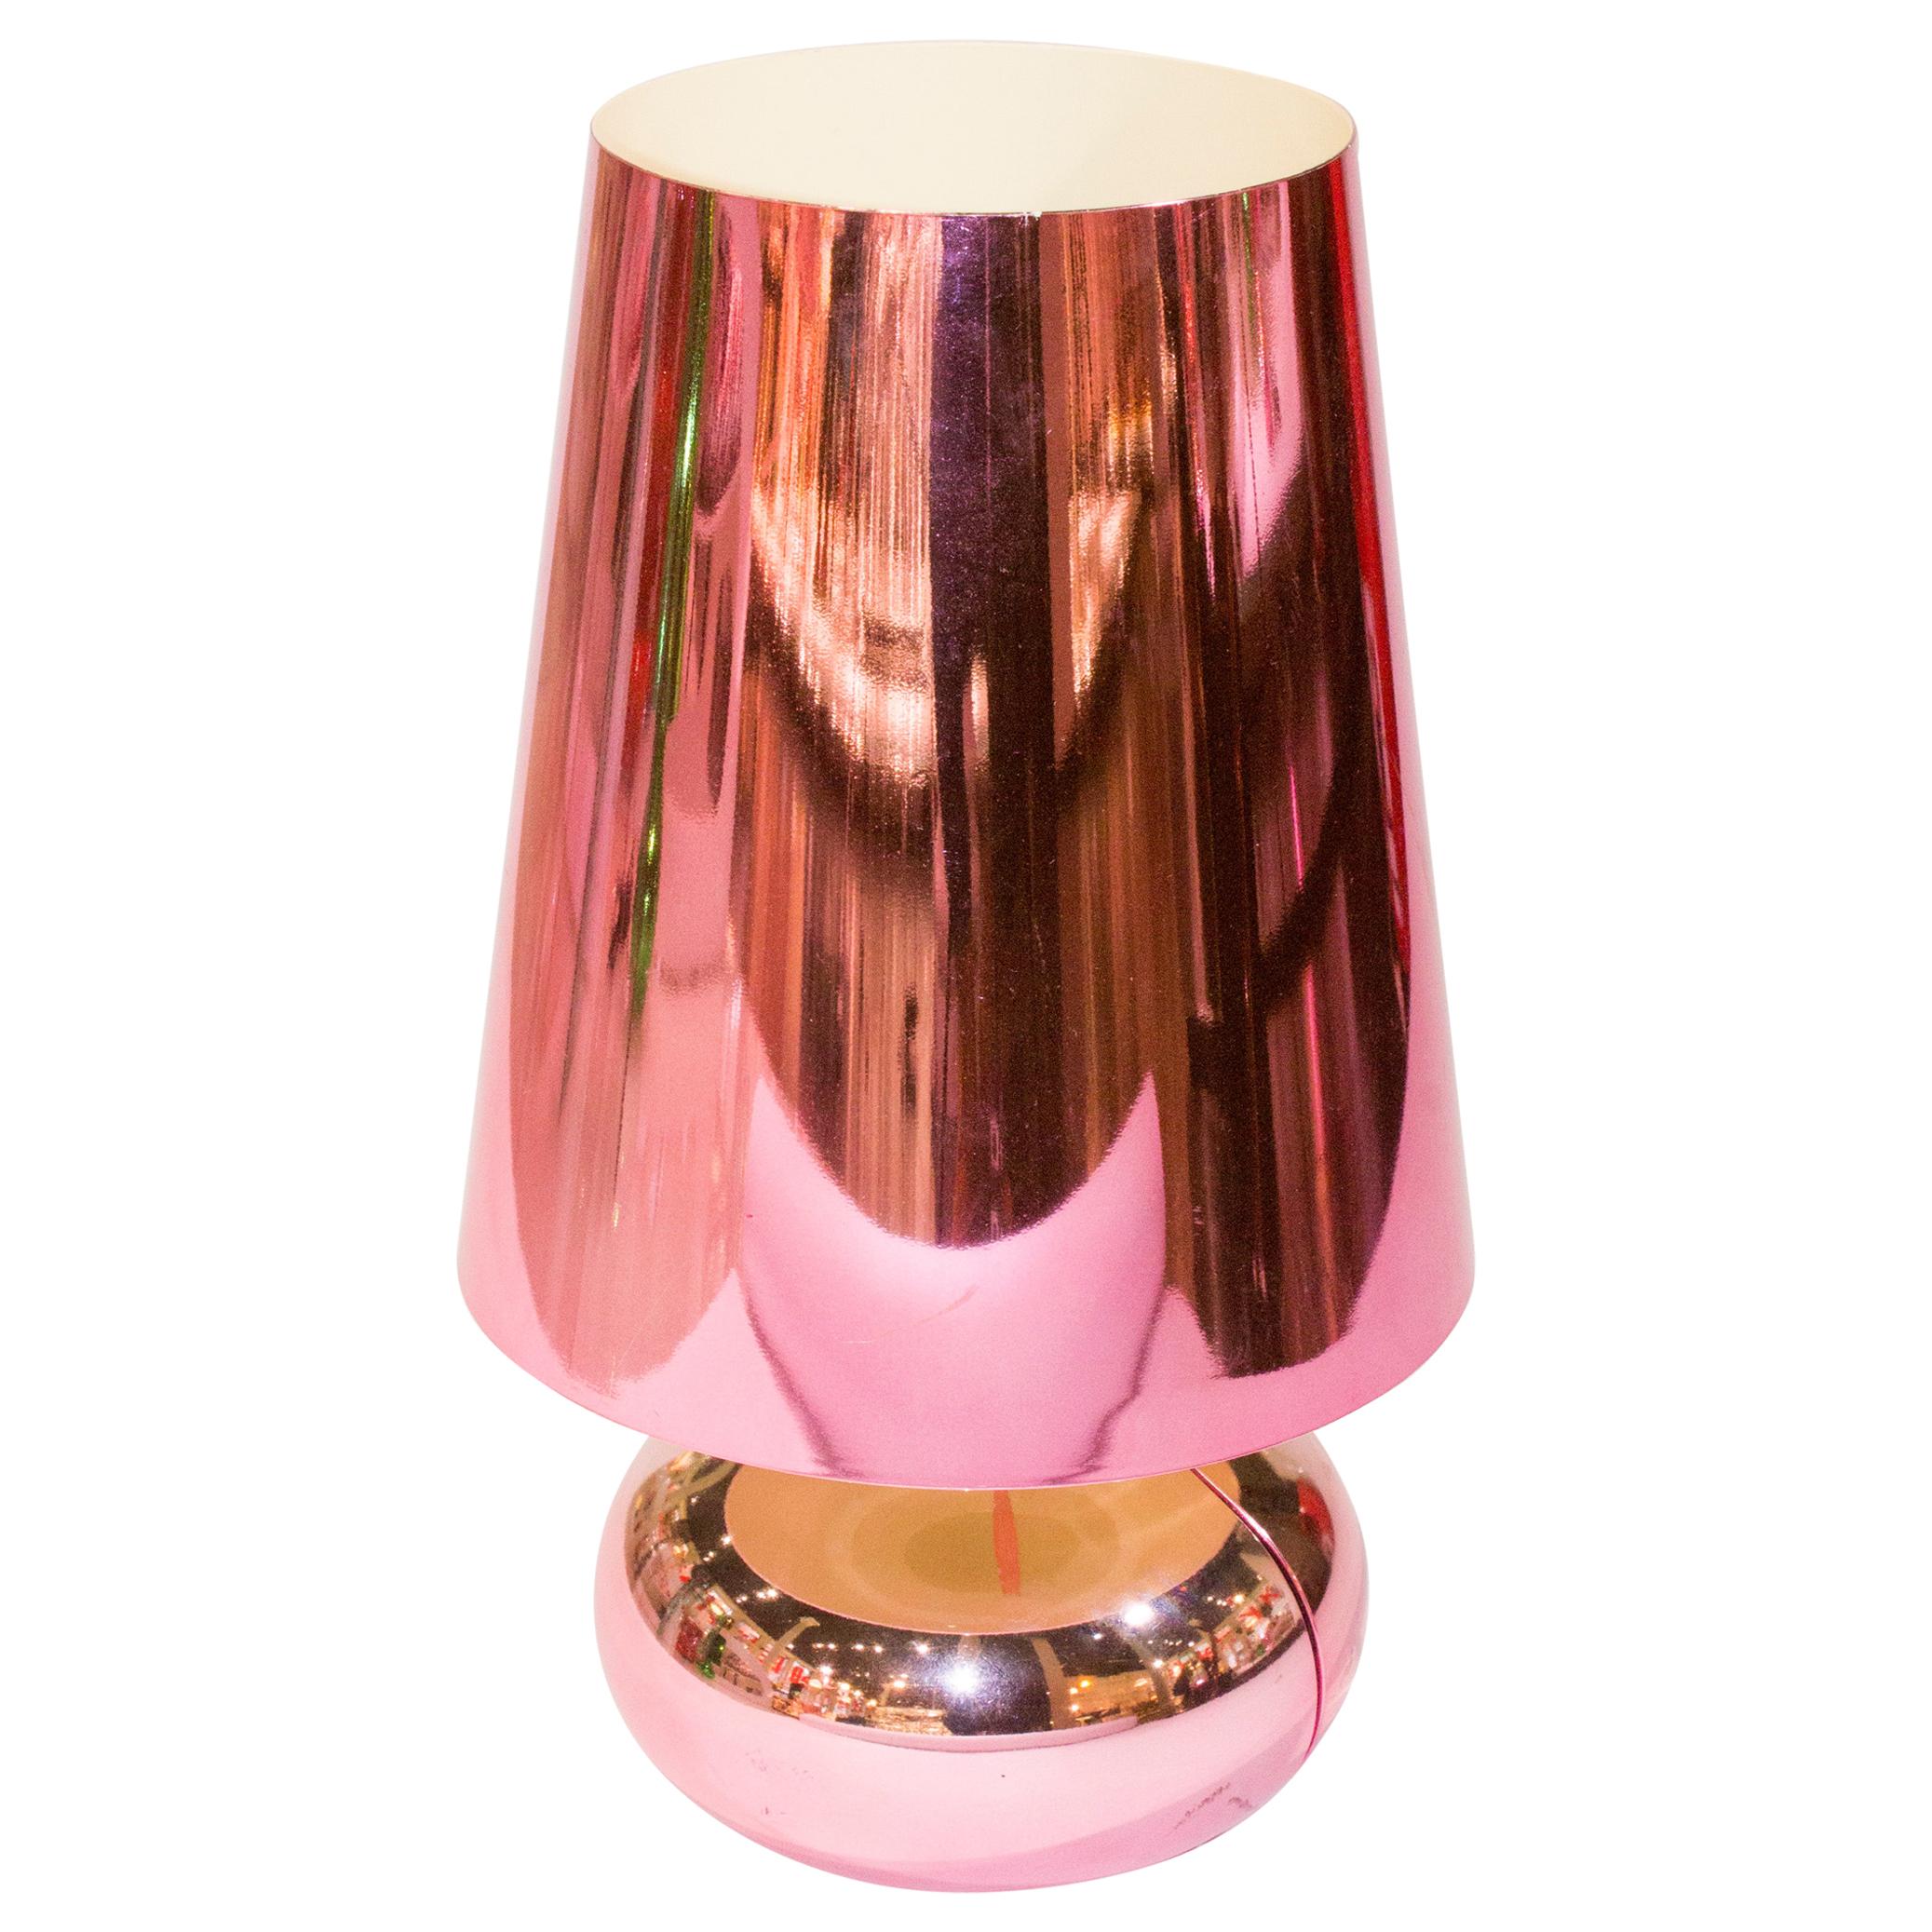 Kartell Cindy Lamp in Fuchsia Pink by Ferruccio Laviani For Sale